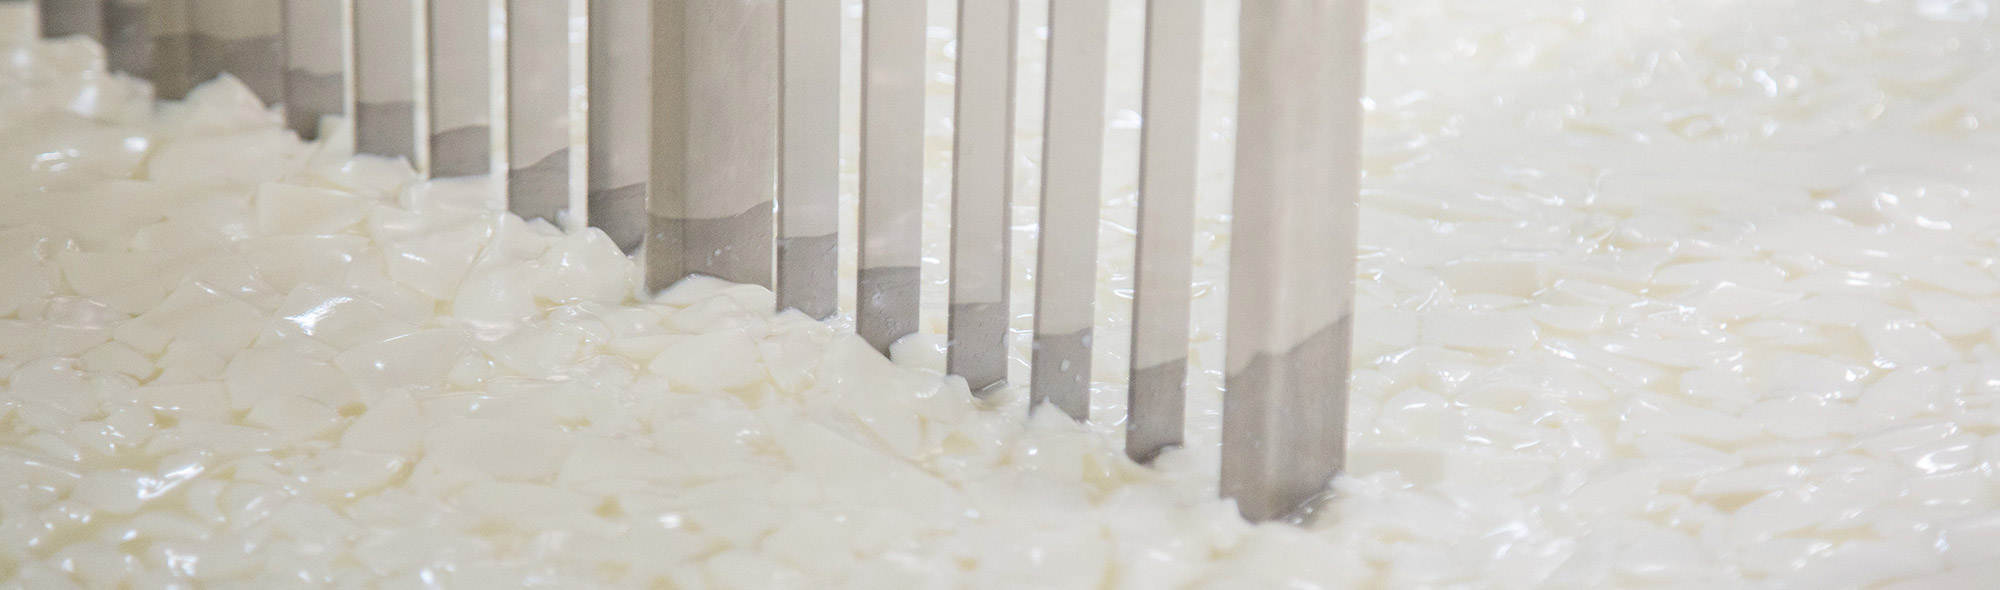 Ask the Cheesemaker